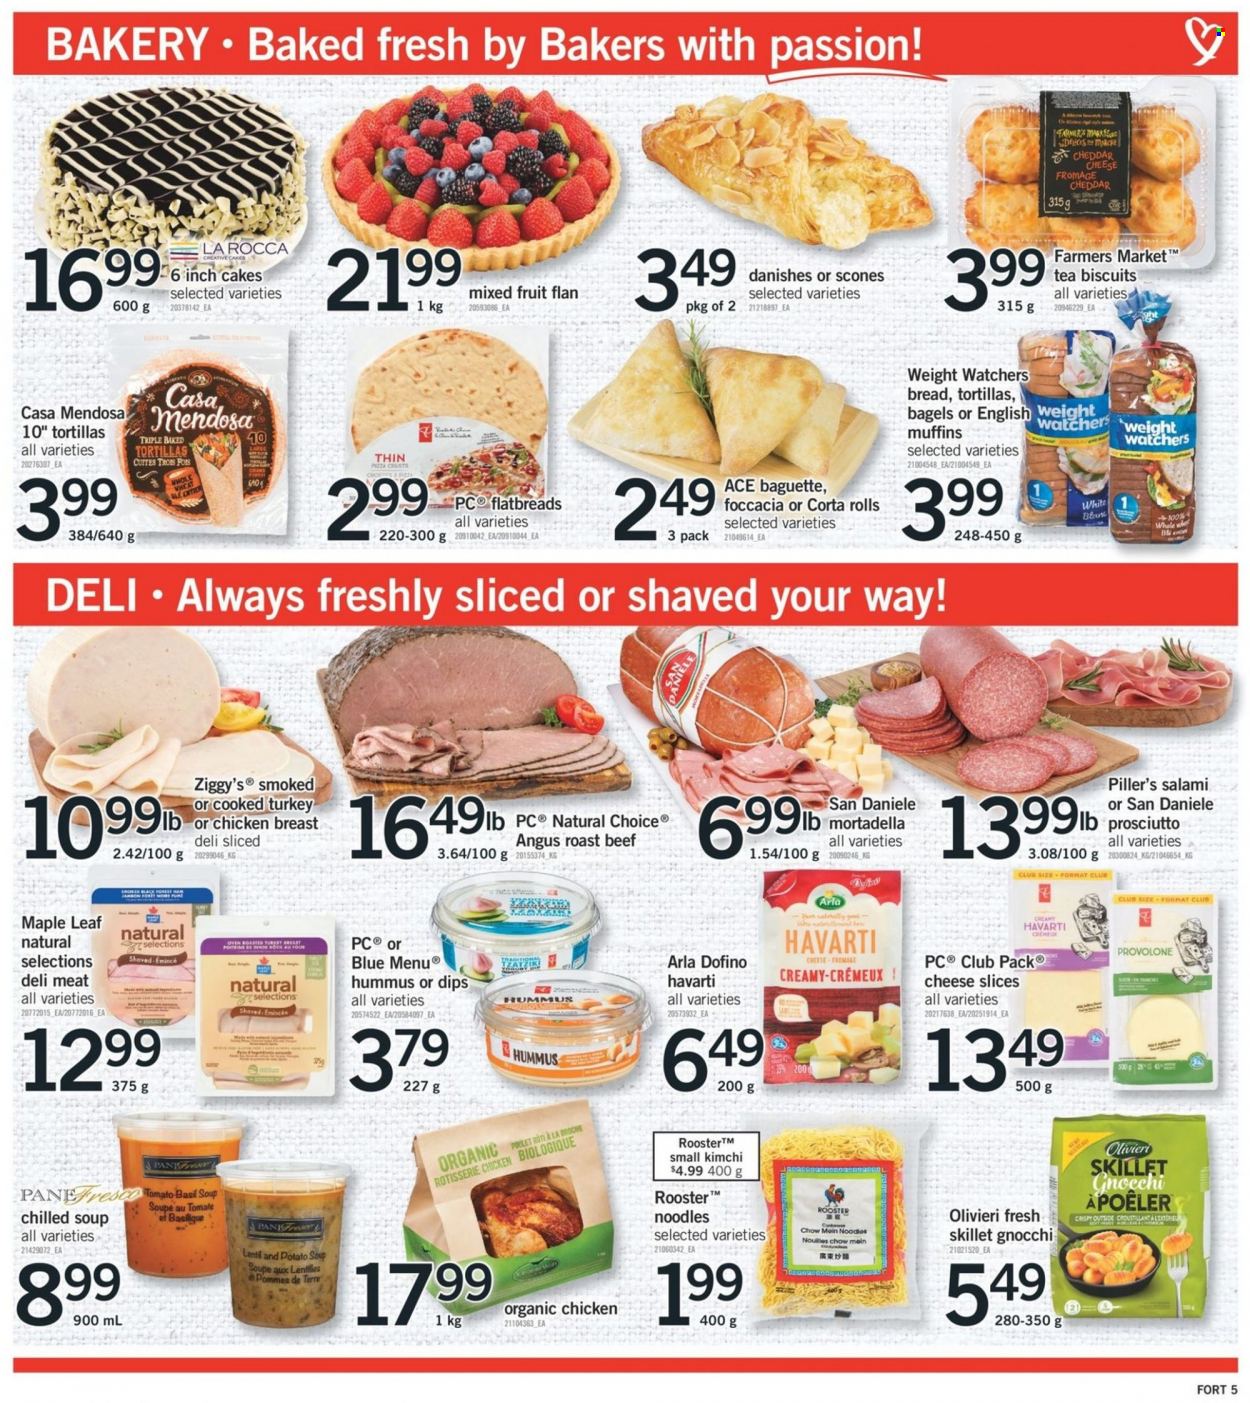 thumbnail - Fortinos Flyer - January 13, 2022 - January 19, 2022 - Sales products - bagels, tortillas, cake, Ace, muffin, pizza, chicken roast, soup, noodles, mortadella, salami, ham, prosciutto, tzatziki, hummus, sliced cheese, Havarti, cheddar, Provolone, Arla, biscuit, tea, Ron Pelicano, chicken breasts, chicken, beef meat, roast beef, Bakers, oven, baguette, gnocchi. Page 7.